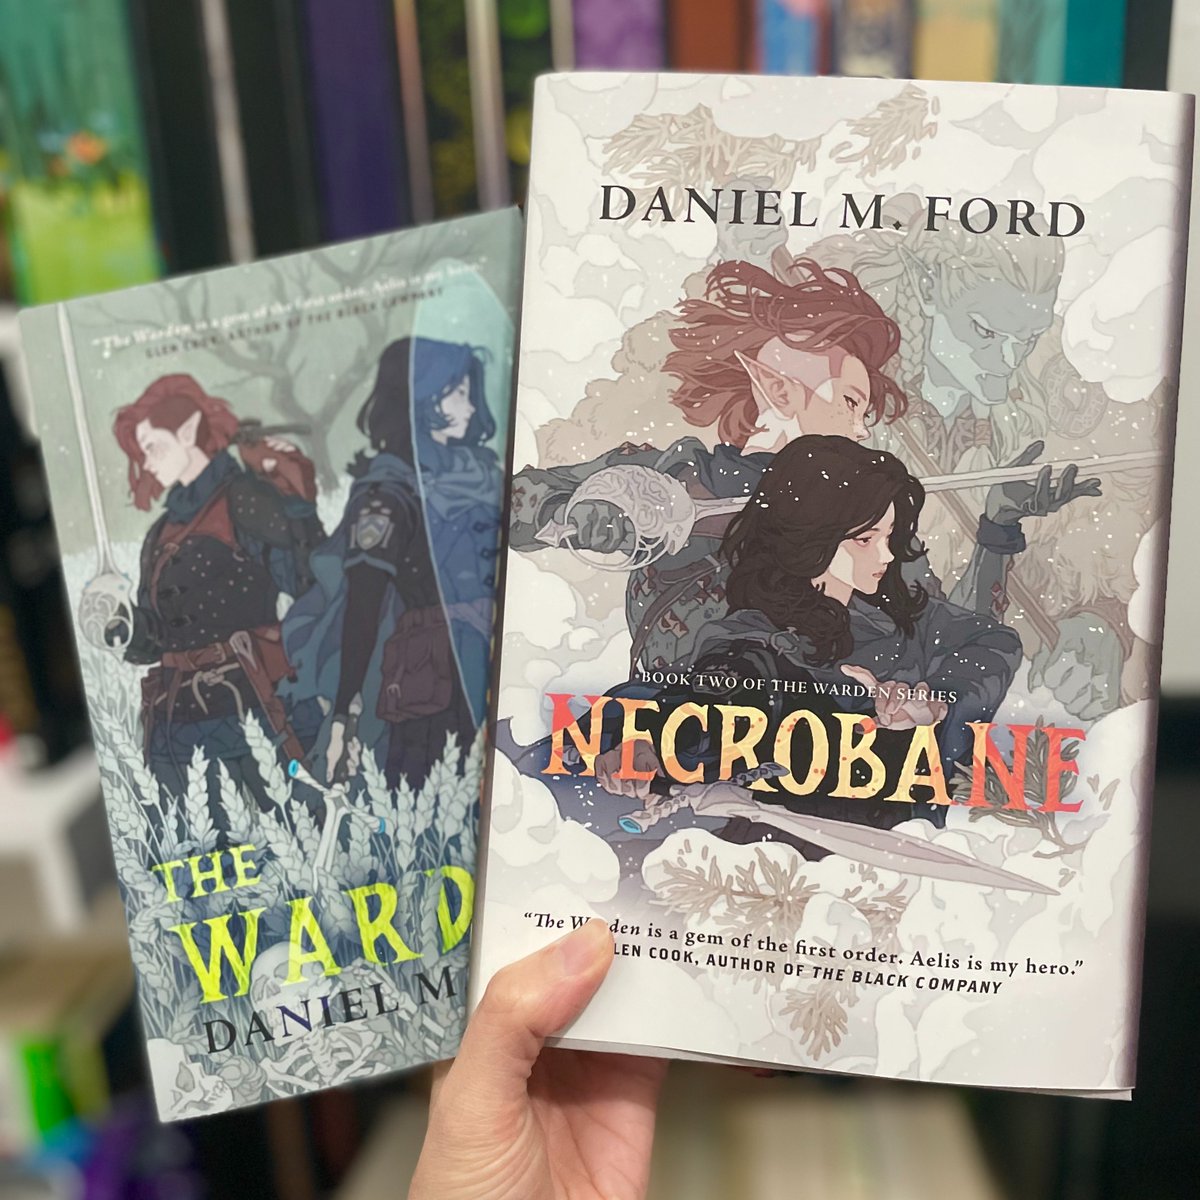 Who's ready for a #sweepstakes?! Today, we're giving YOU the chance to win a paperback copy of #TheWarden and a hardcover copy of #Necrobane by @soundingline! Just follow us, then like and repost to enter for the chance to win. Best of luck! ✨